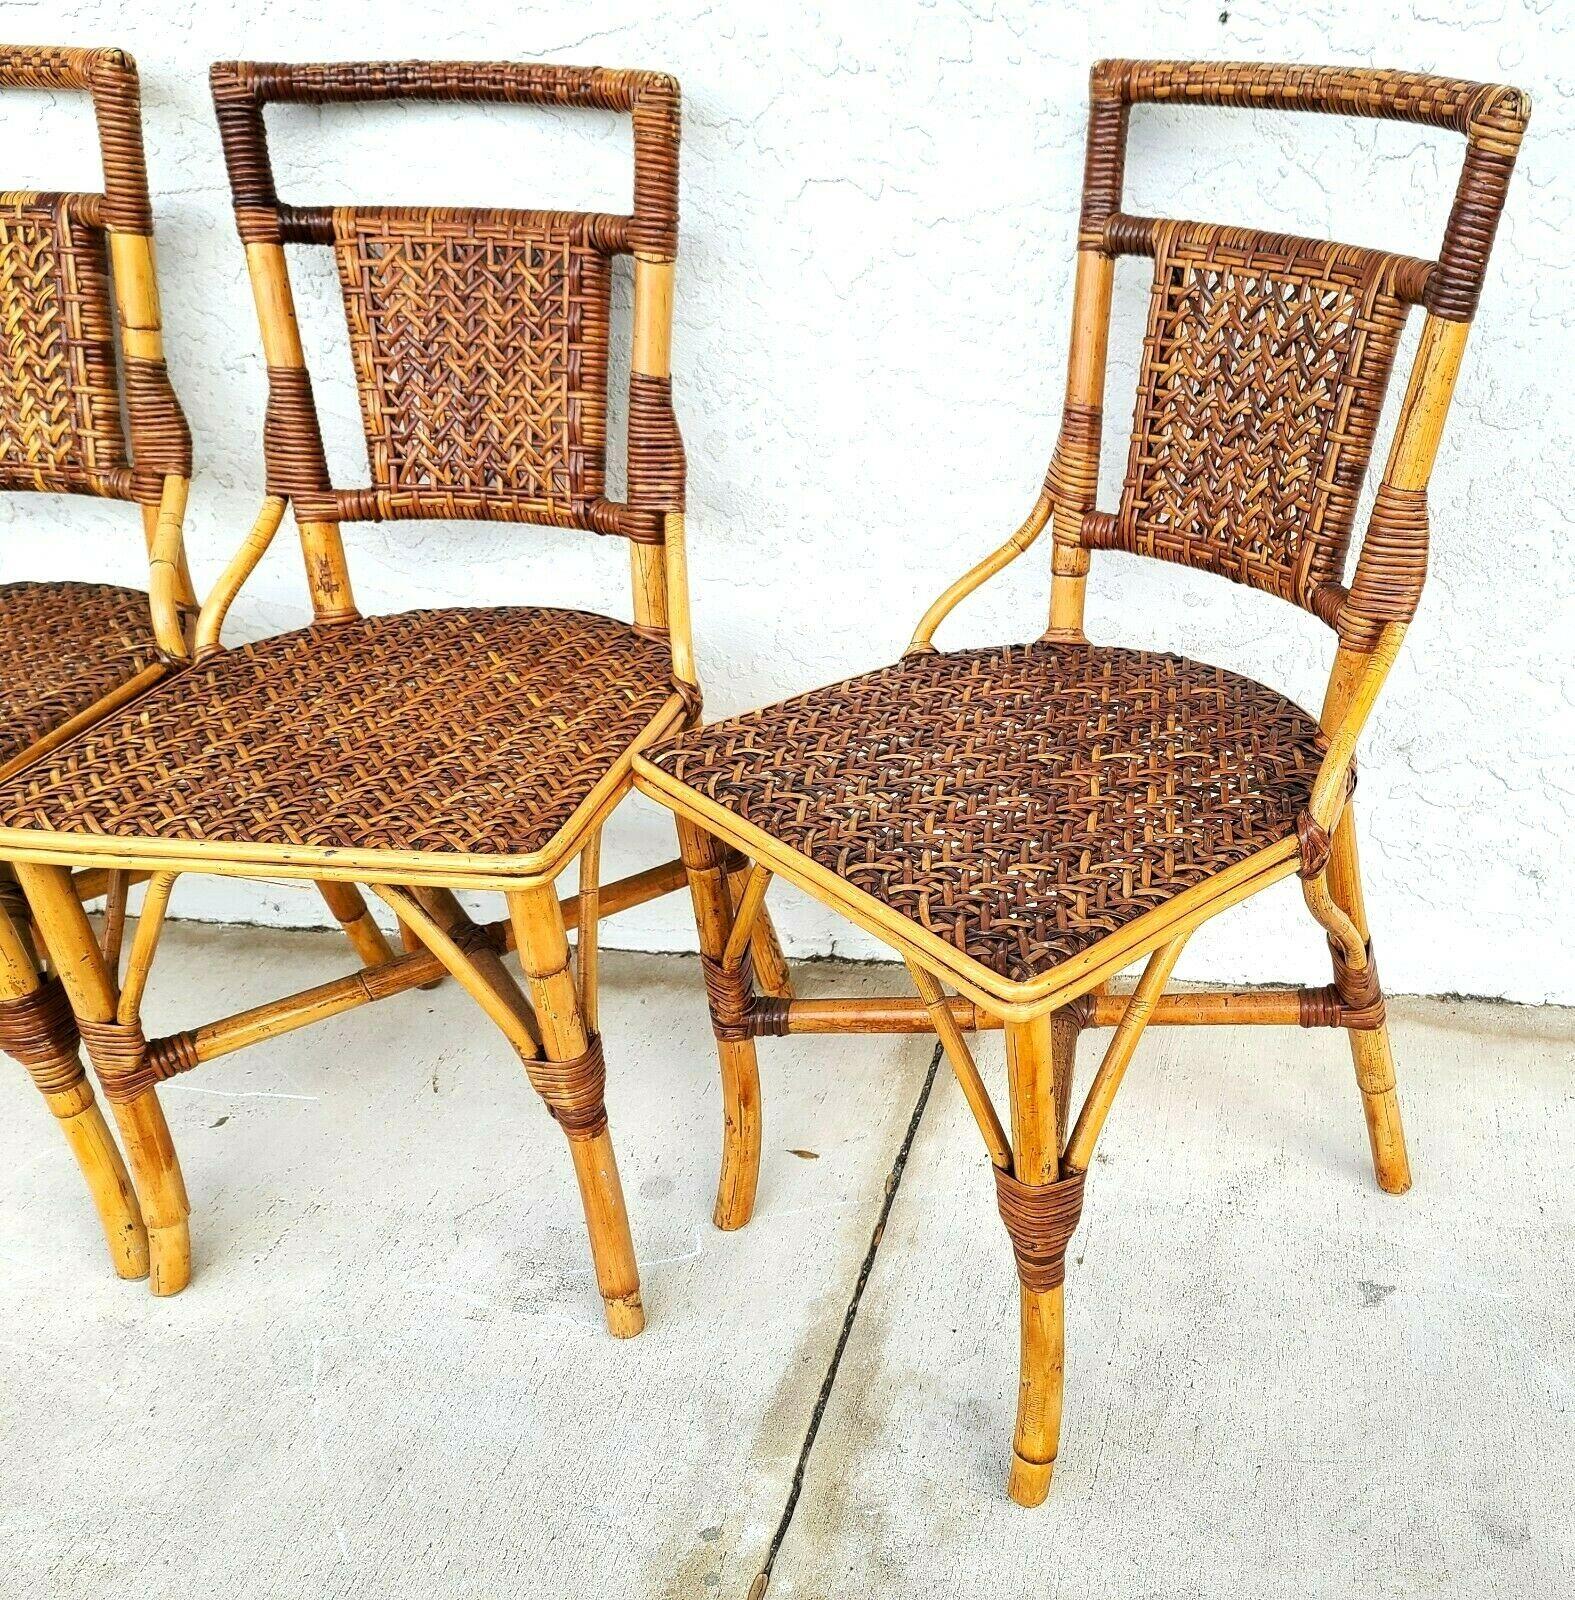 Offering One Of Our Recent Palm Beach Estate Fine Furniture Acquisitions Of A Set of 4 Vintage French Style Bamboo Rattan Wicker Dining Chairs 
Very well made chairs with supporting cross straps under the seats.

Approximate Measurements in